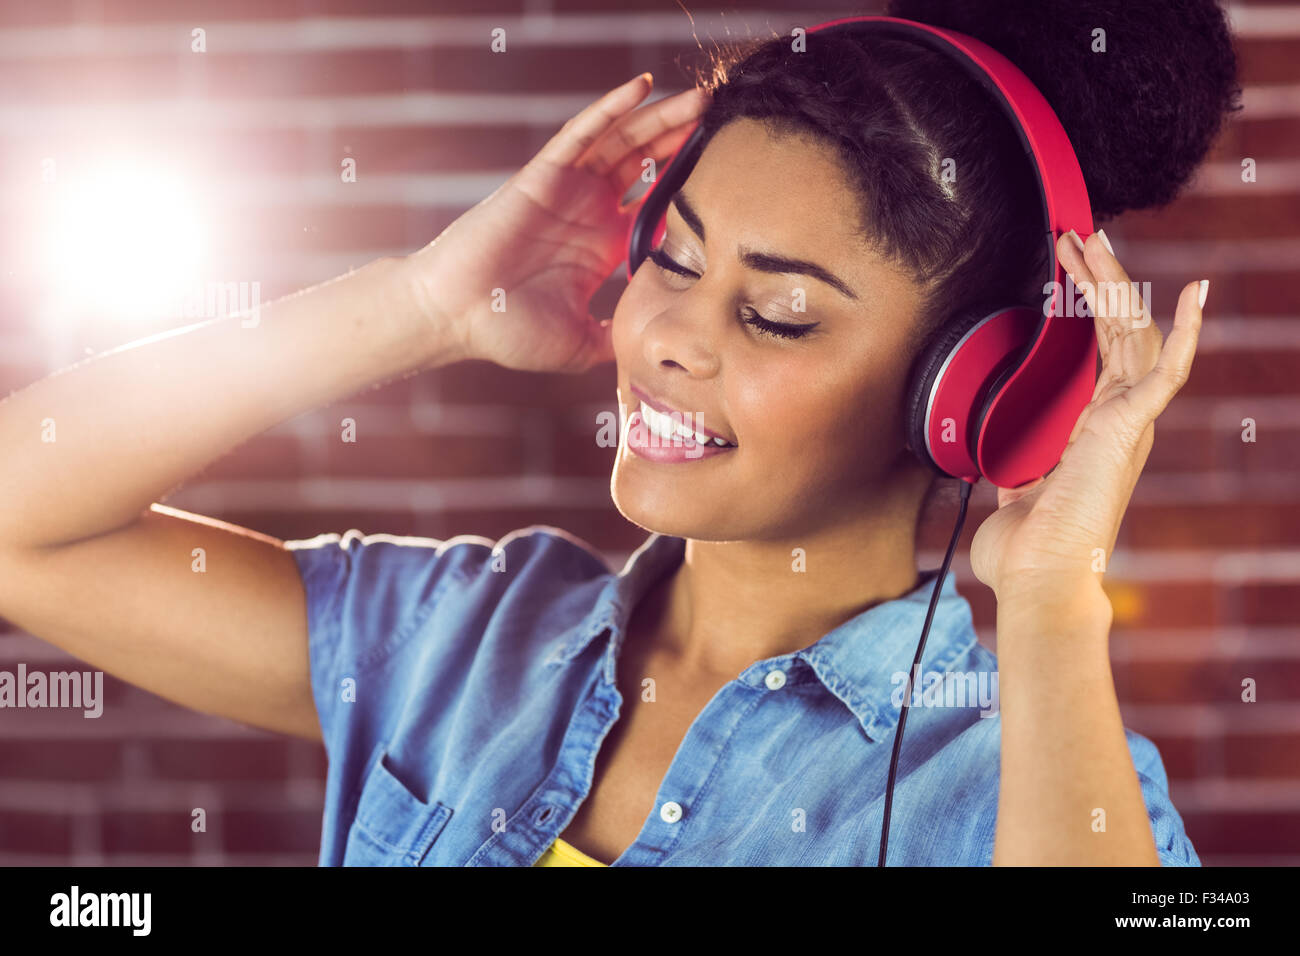 A smiling woman being transported by music Stock Photo